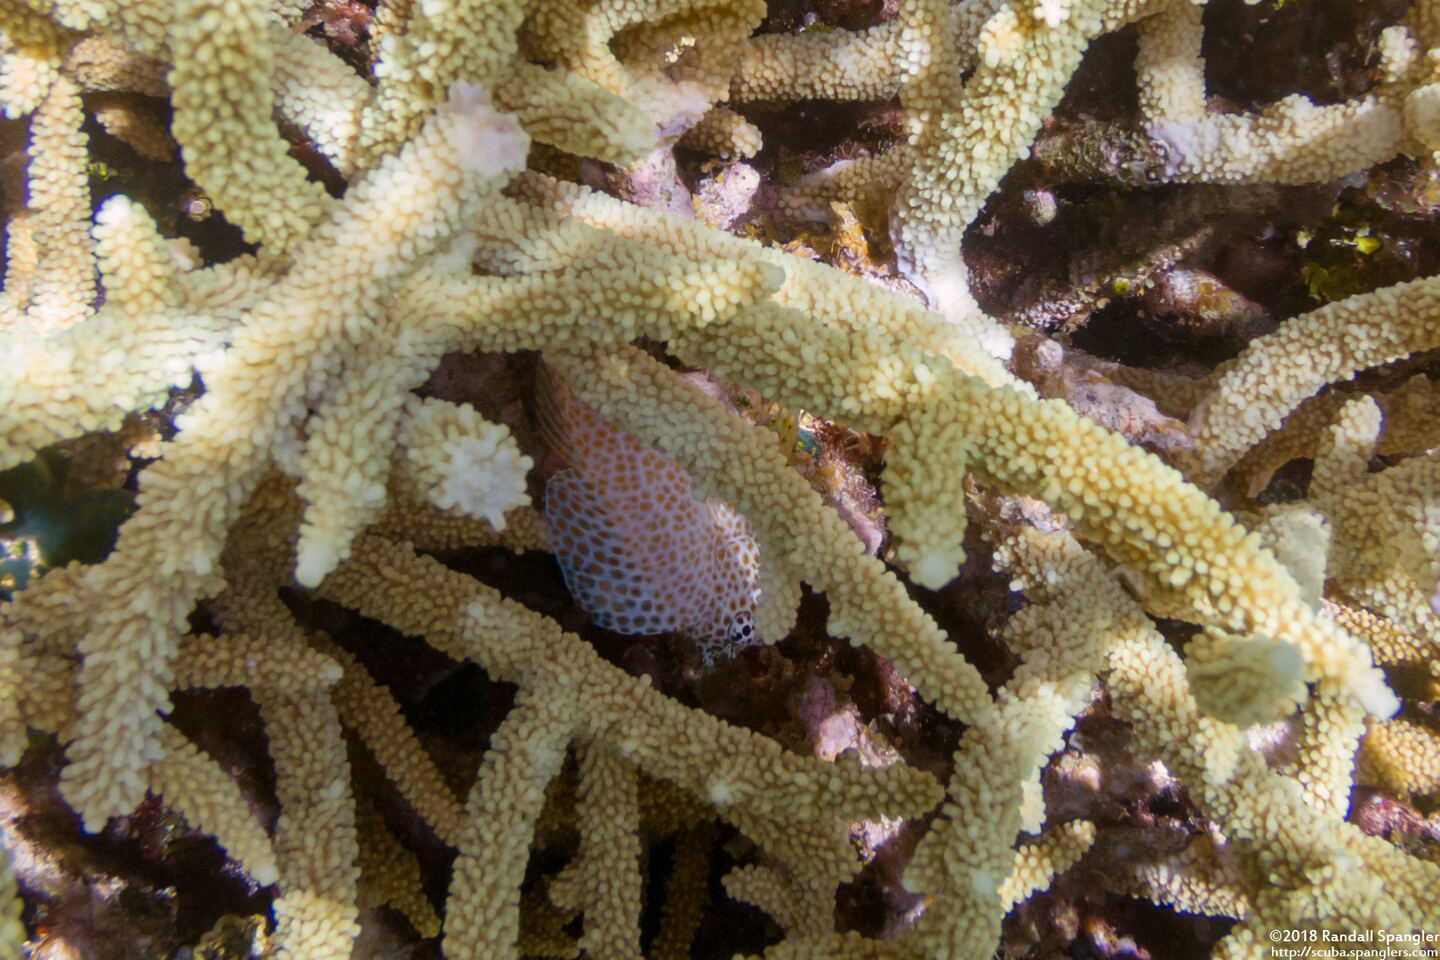 Exallias brevis (Spotted Coral Blenny)